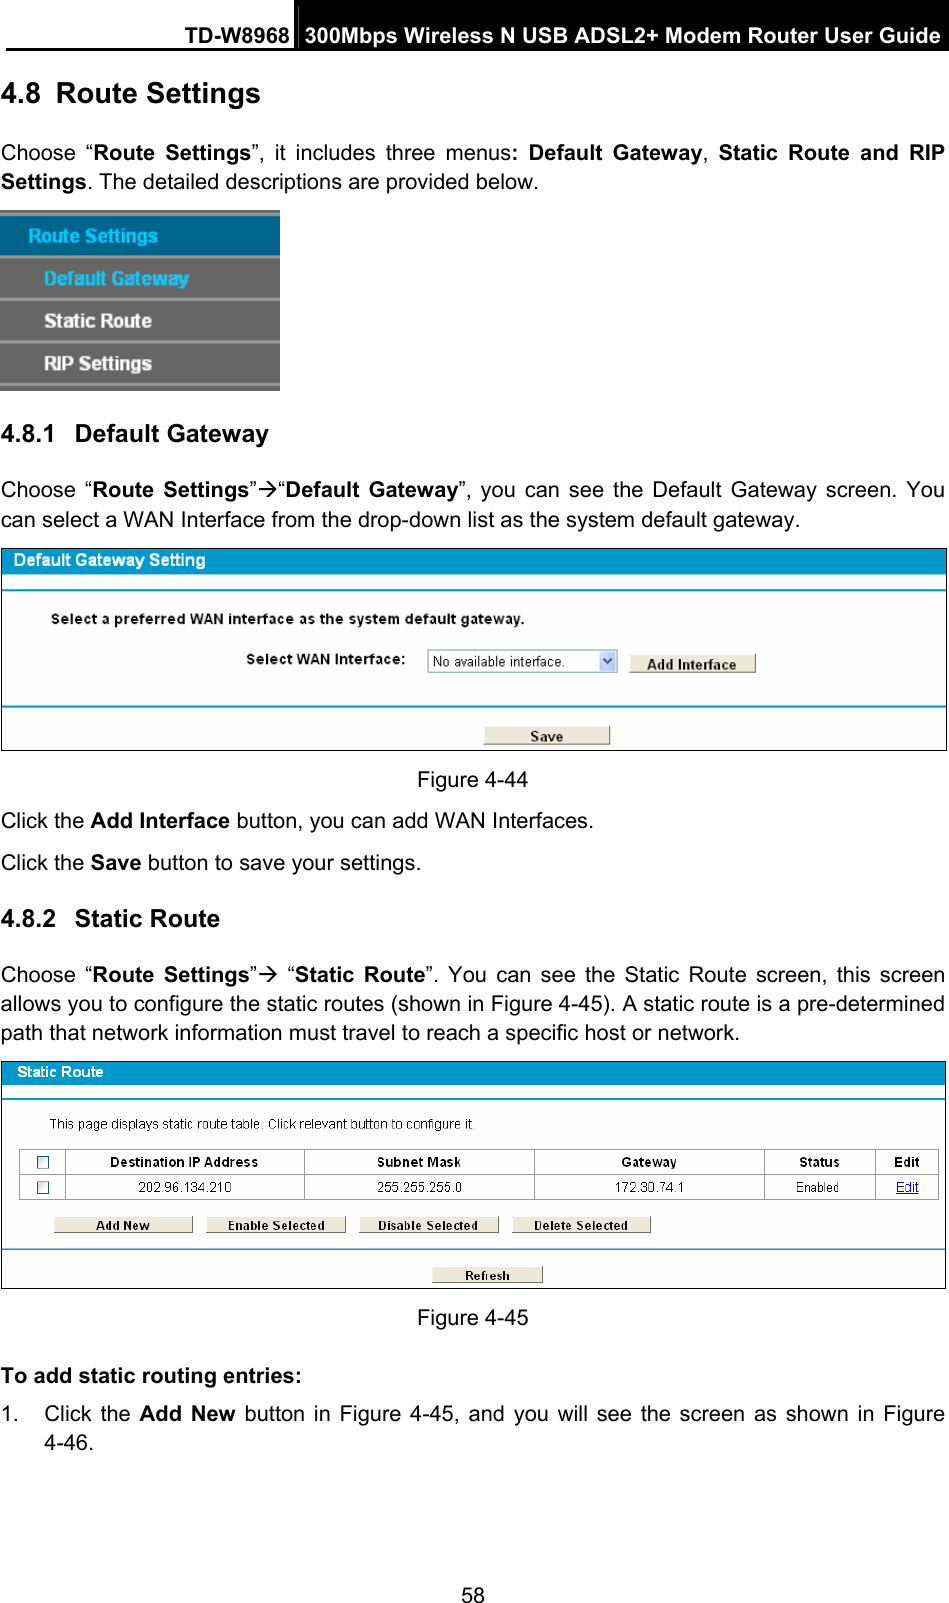 TD-W8968  300Mbps Wireless N USB ADSL2+ Modem Router User Guide 58 4.8  Route Settings Choose “Route Settings”, it includes three menus: Default Gateway,  Static Route and RIP Settings. The detailed descriptions are provided below.  4.8.1  Default Gateway Choose “Route Settings”Æ“Default Gateway”, you can see the Default Gateway screen. You can select a WAN Interface from the drop-down list as the system default gateway.    Figure 4-44 Click the Add Interface button, you can add WAN Interfaces. Click the Save button to save your settings. 4.8.2  Static Route Choose “Route Settings”Æ “Static Route”. You can see the Static Route screen, this screen allows you to configure the static routes (shown in Figure 4-45). A static route is a pre-determined path that network information must travel to reach a specific host or network.  Figure 4-45 To add static routing entries: 1. Click the Add New button in Figure 4-45, and you will see the screen as shown in Figure 4-46.  